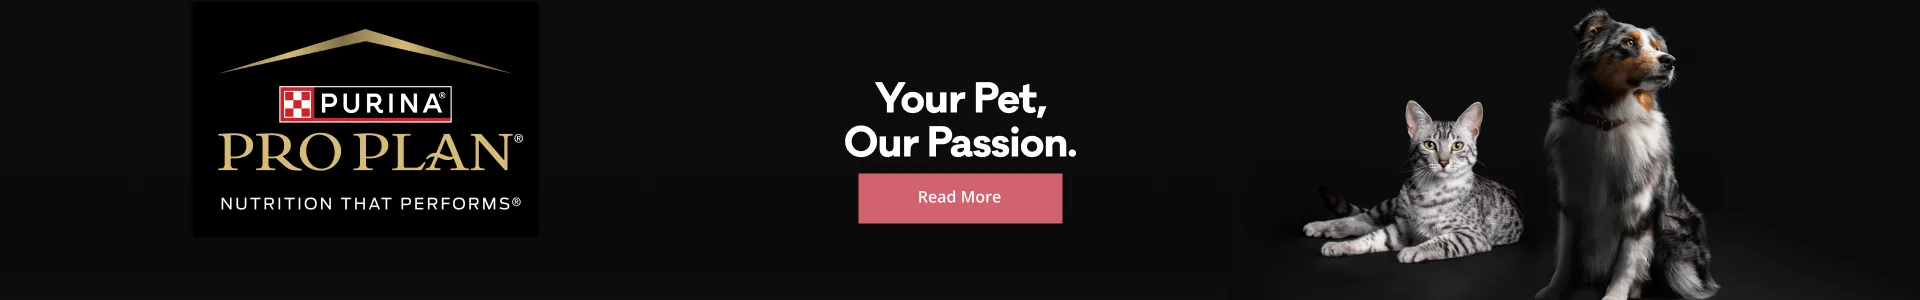 Your pet, our passion. Find out more about Purina’s nutritious meals at Petshop Science. Click to read more.